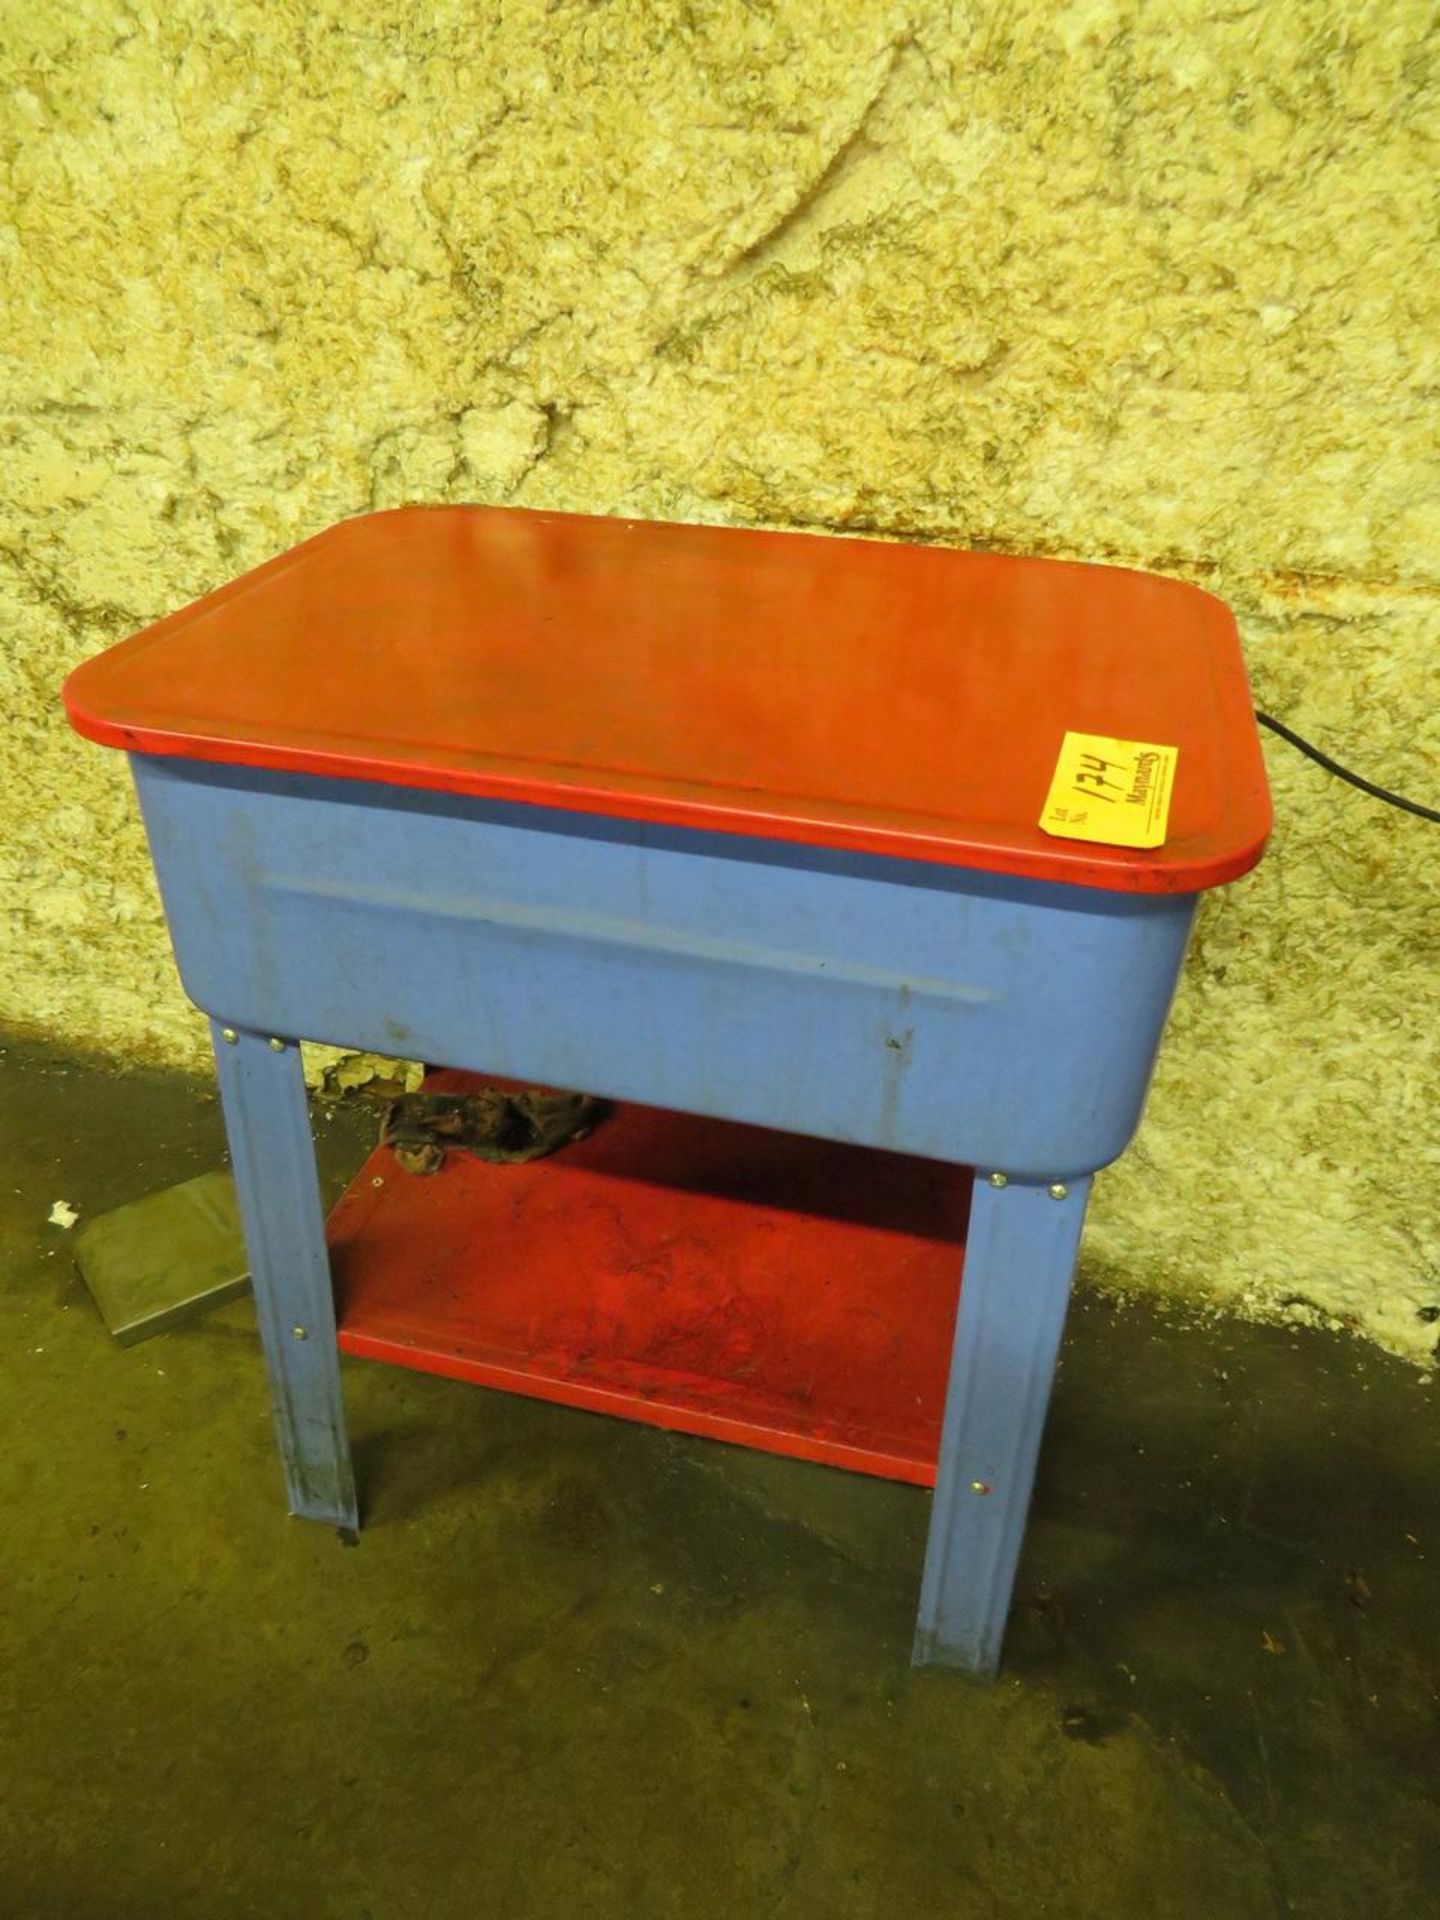 CENTRAL MACHINERY 20 GALLON PARTS WASHER WITH PUMP